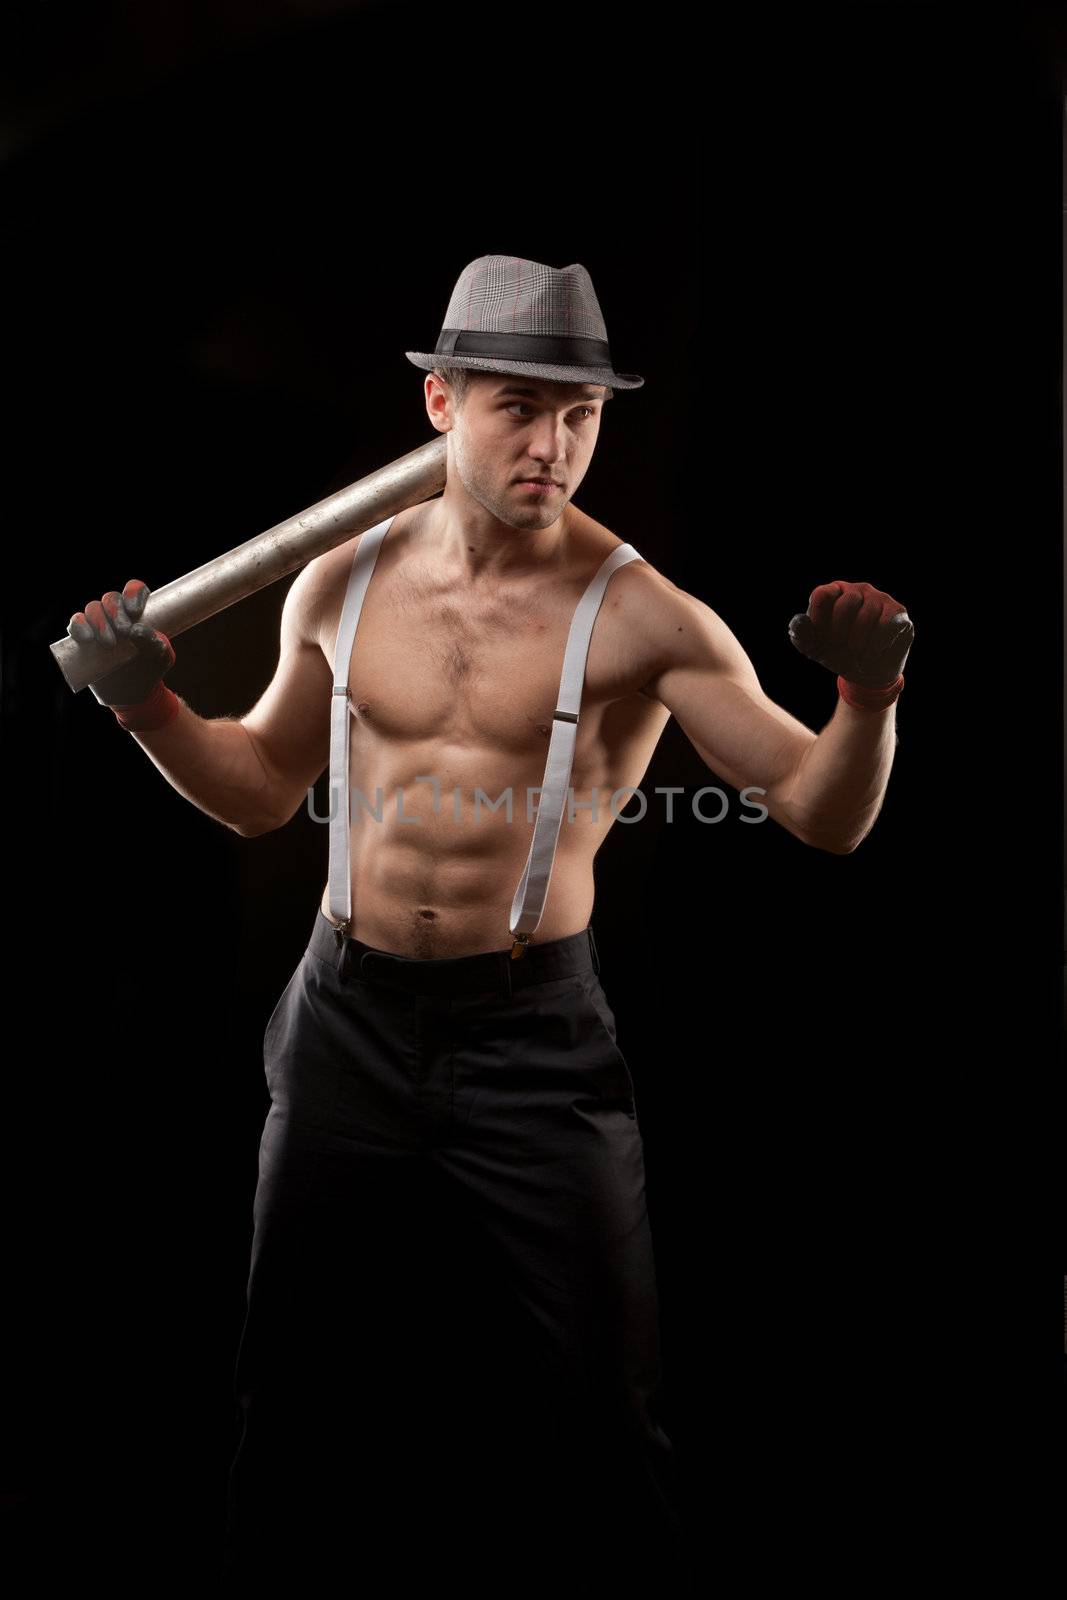 fighter in the hat on with suspenders over black